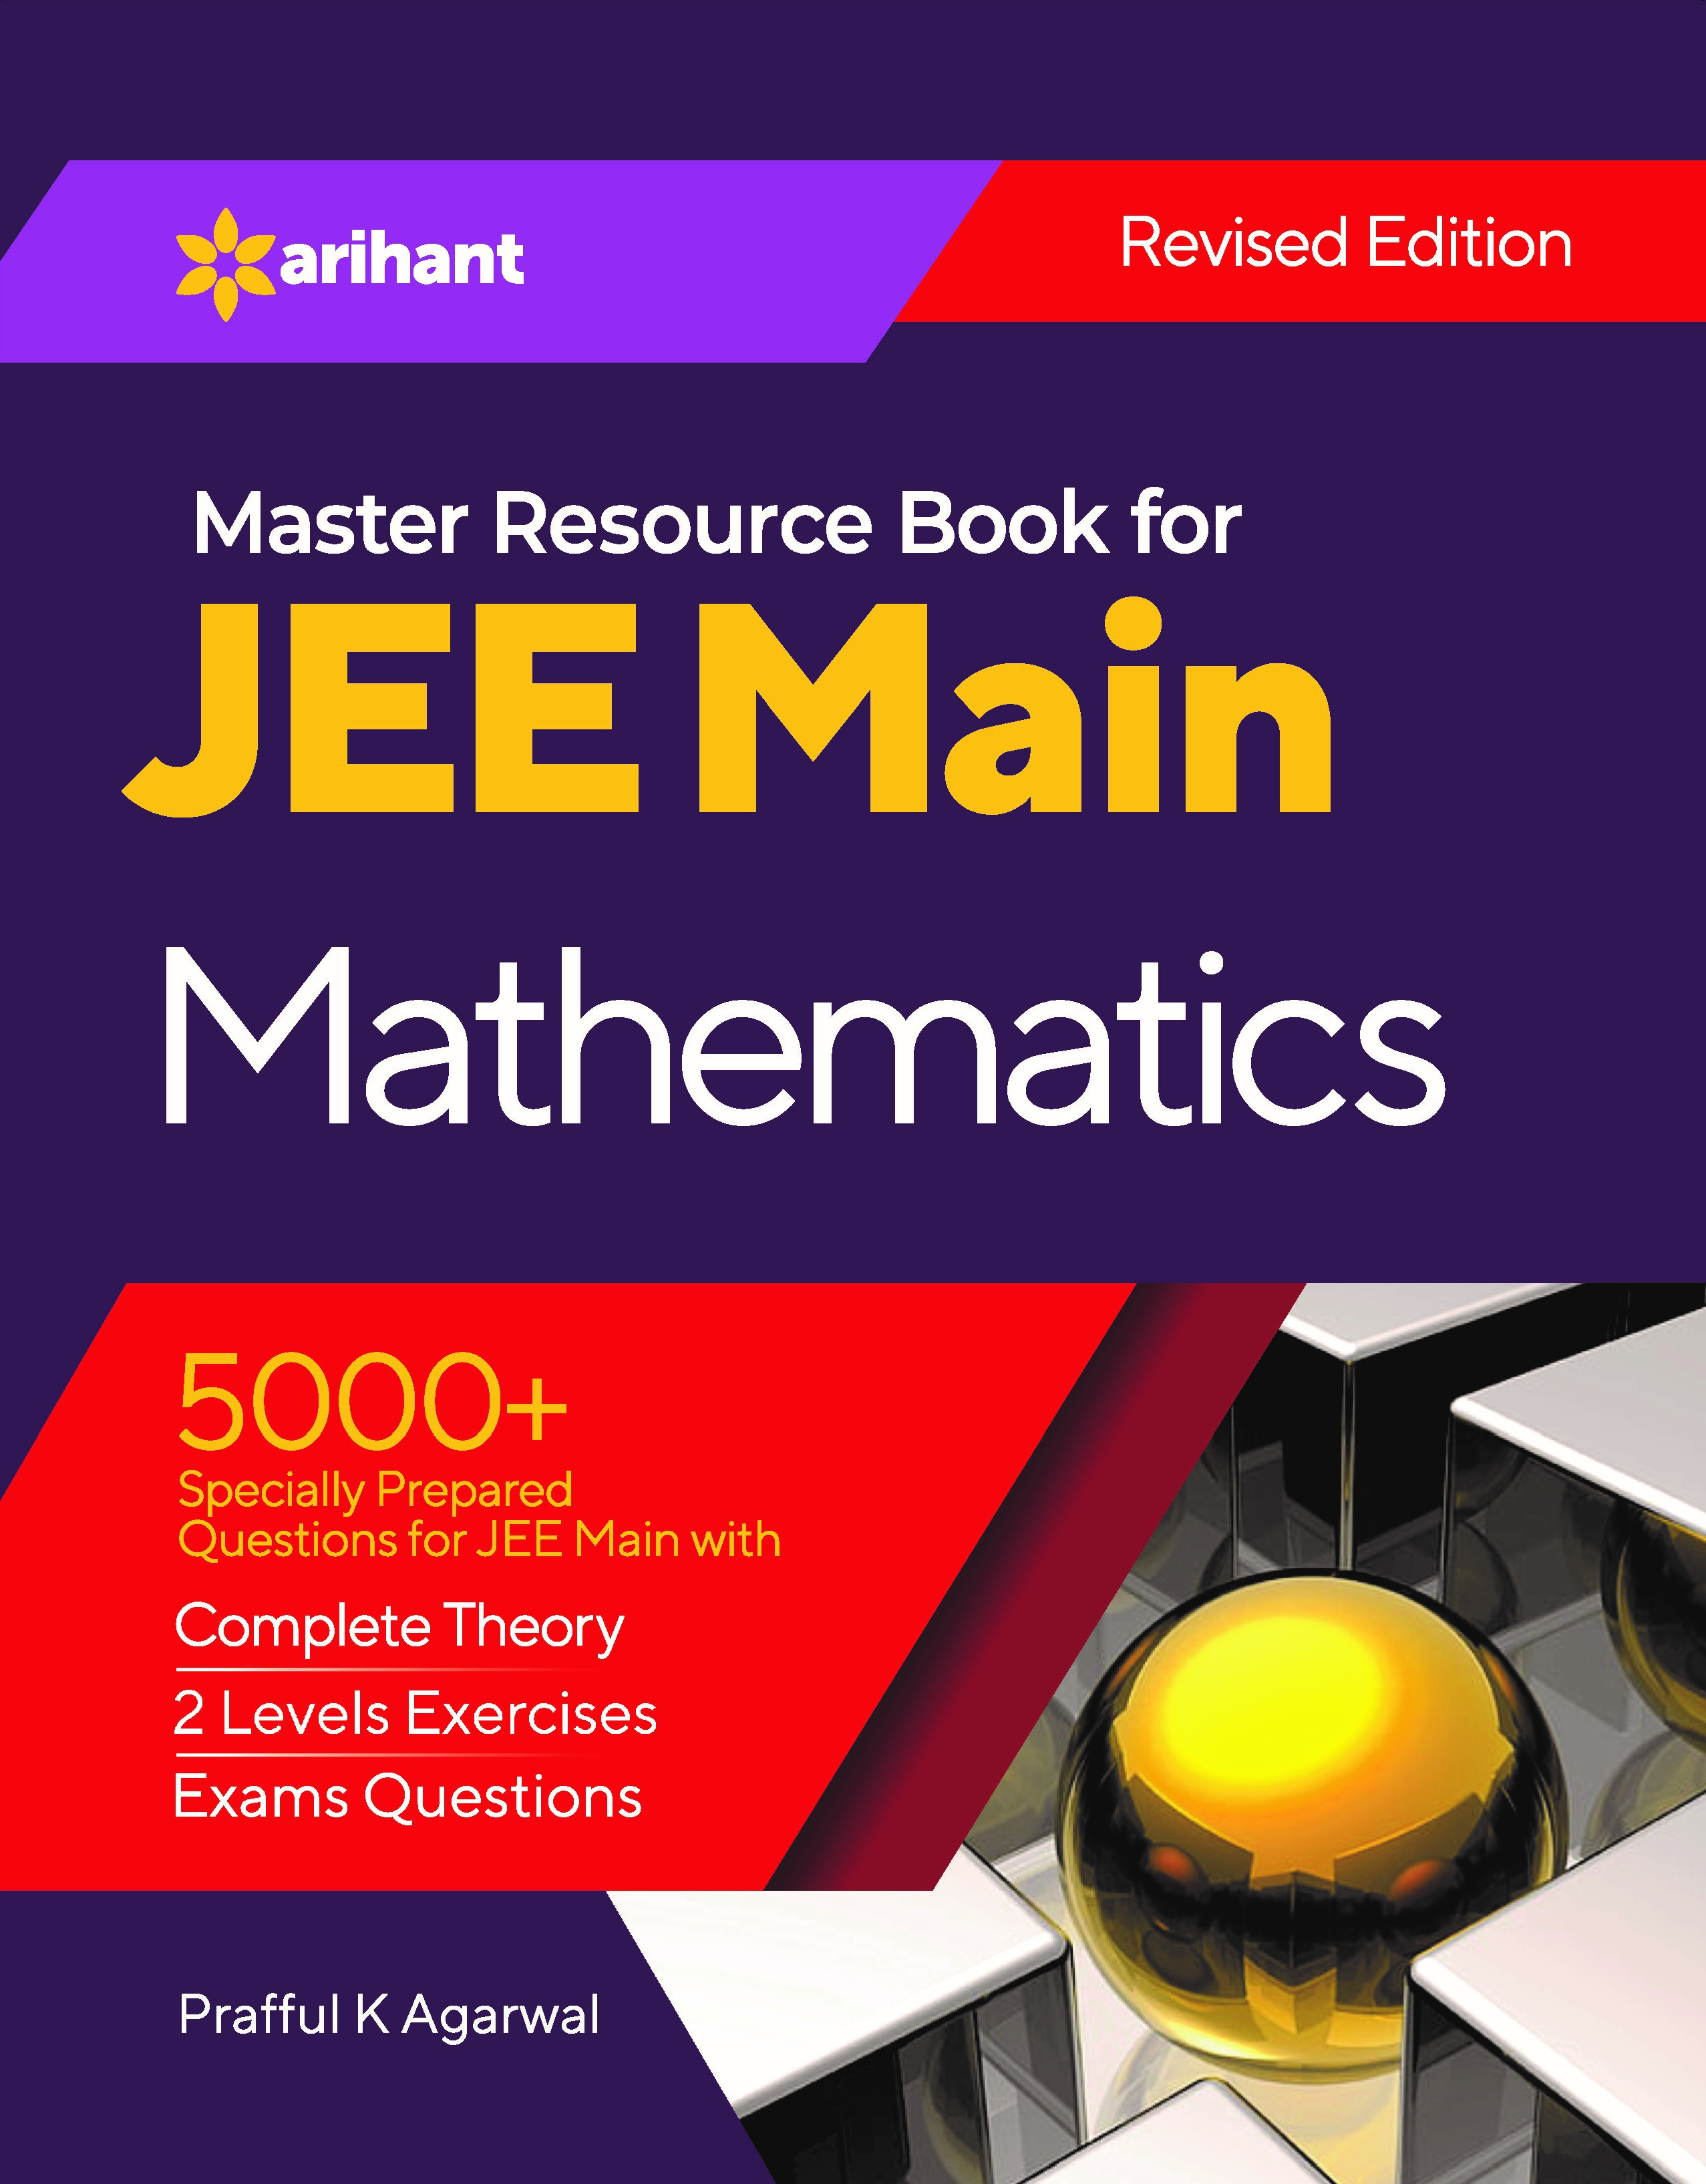 Master Resource Book in Mathematics for JEE Main 2022